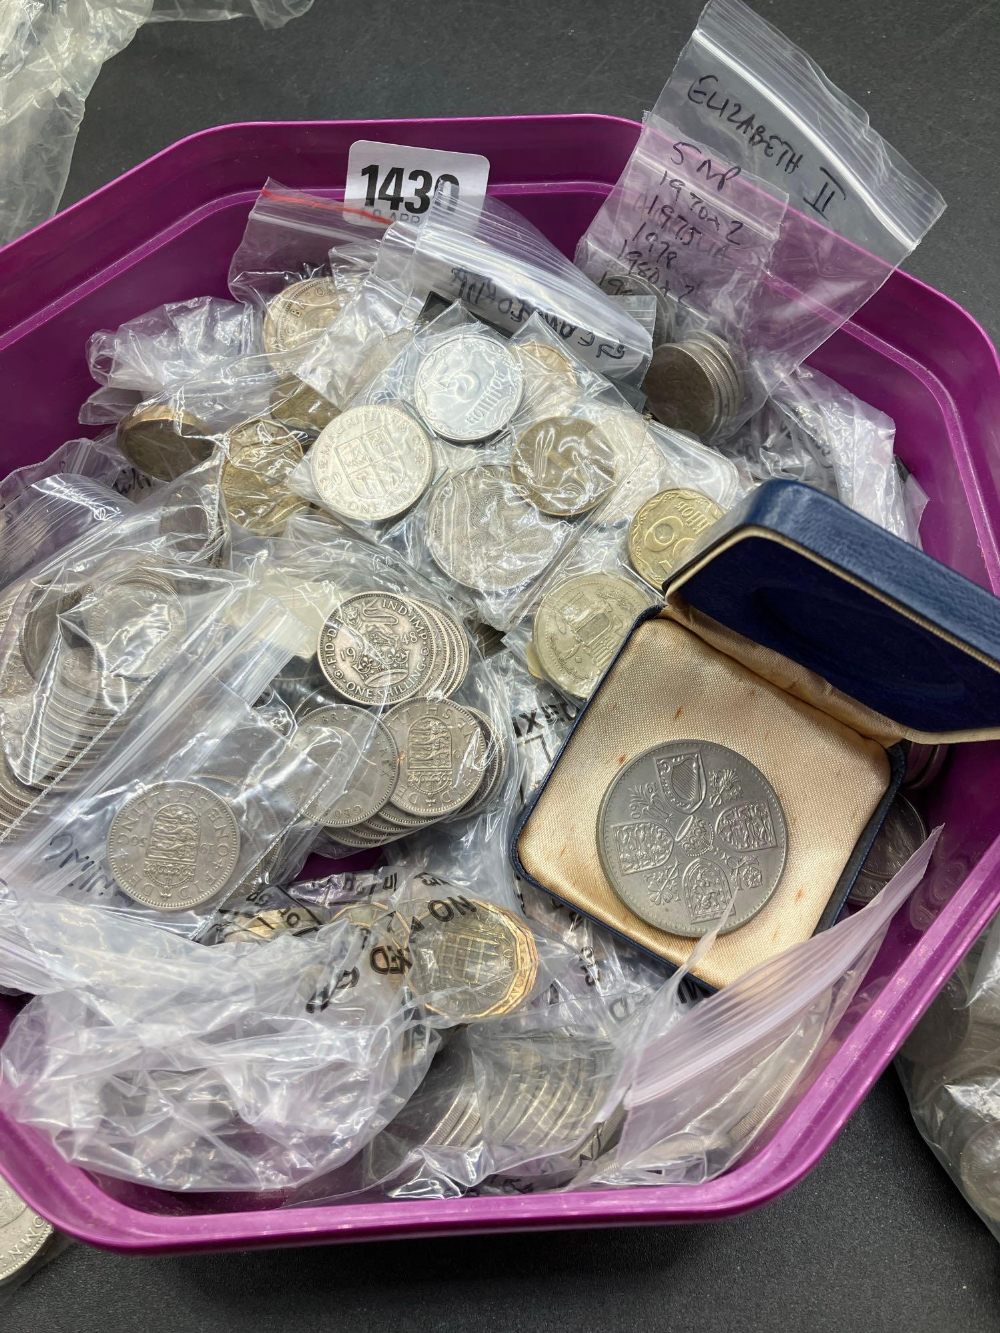 Tub of mainly British coins